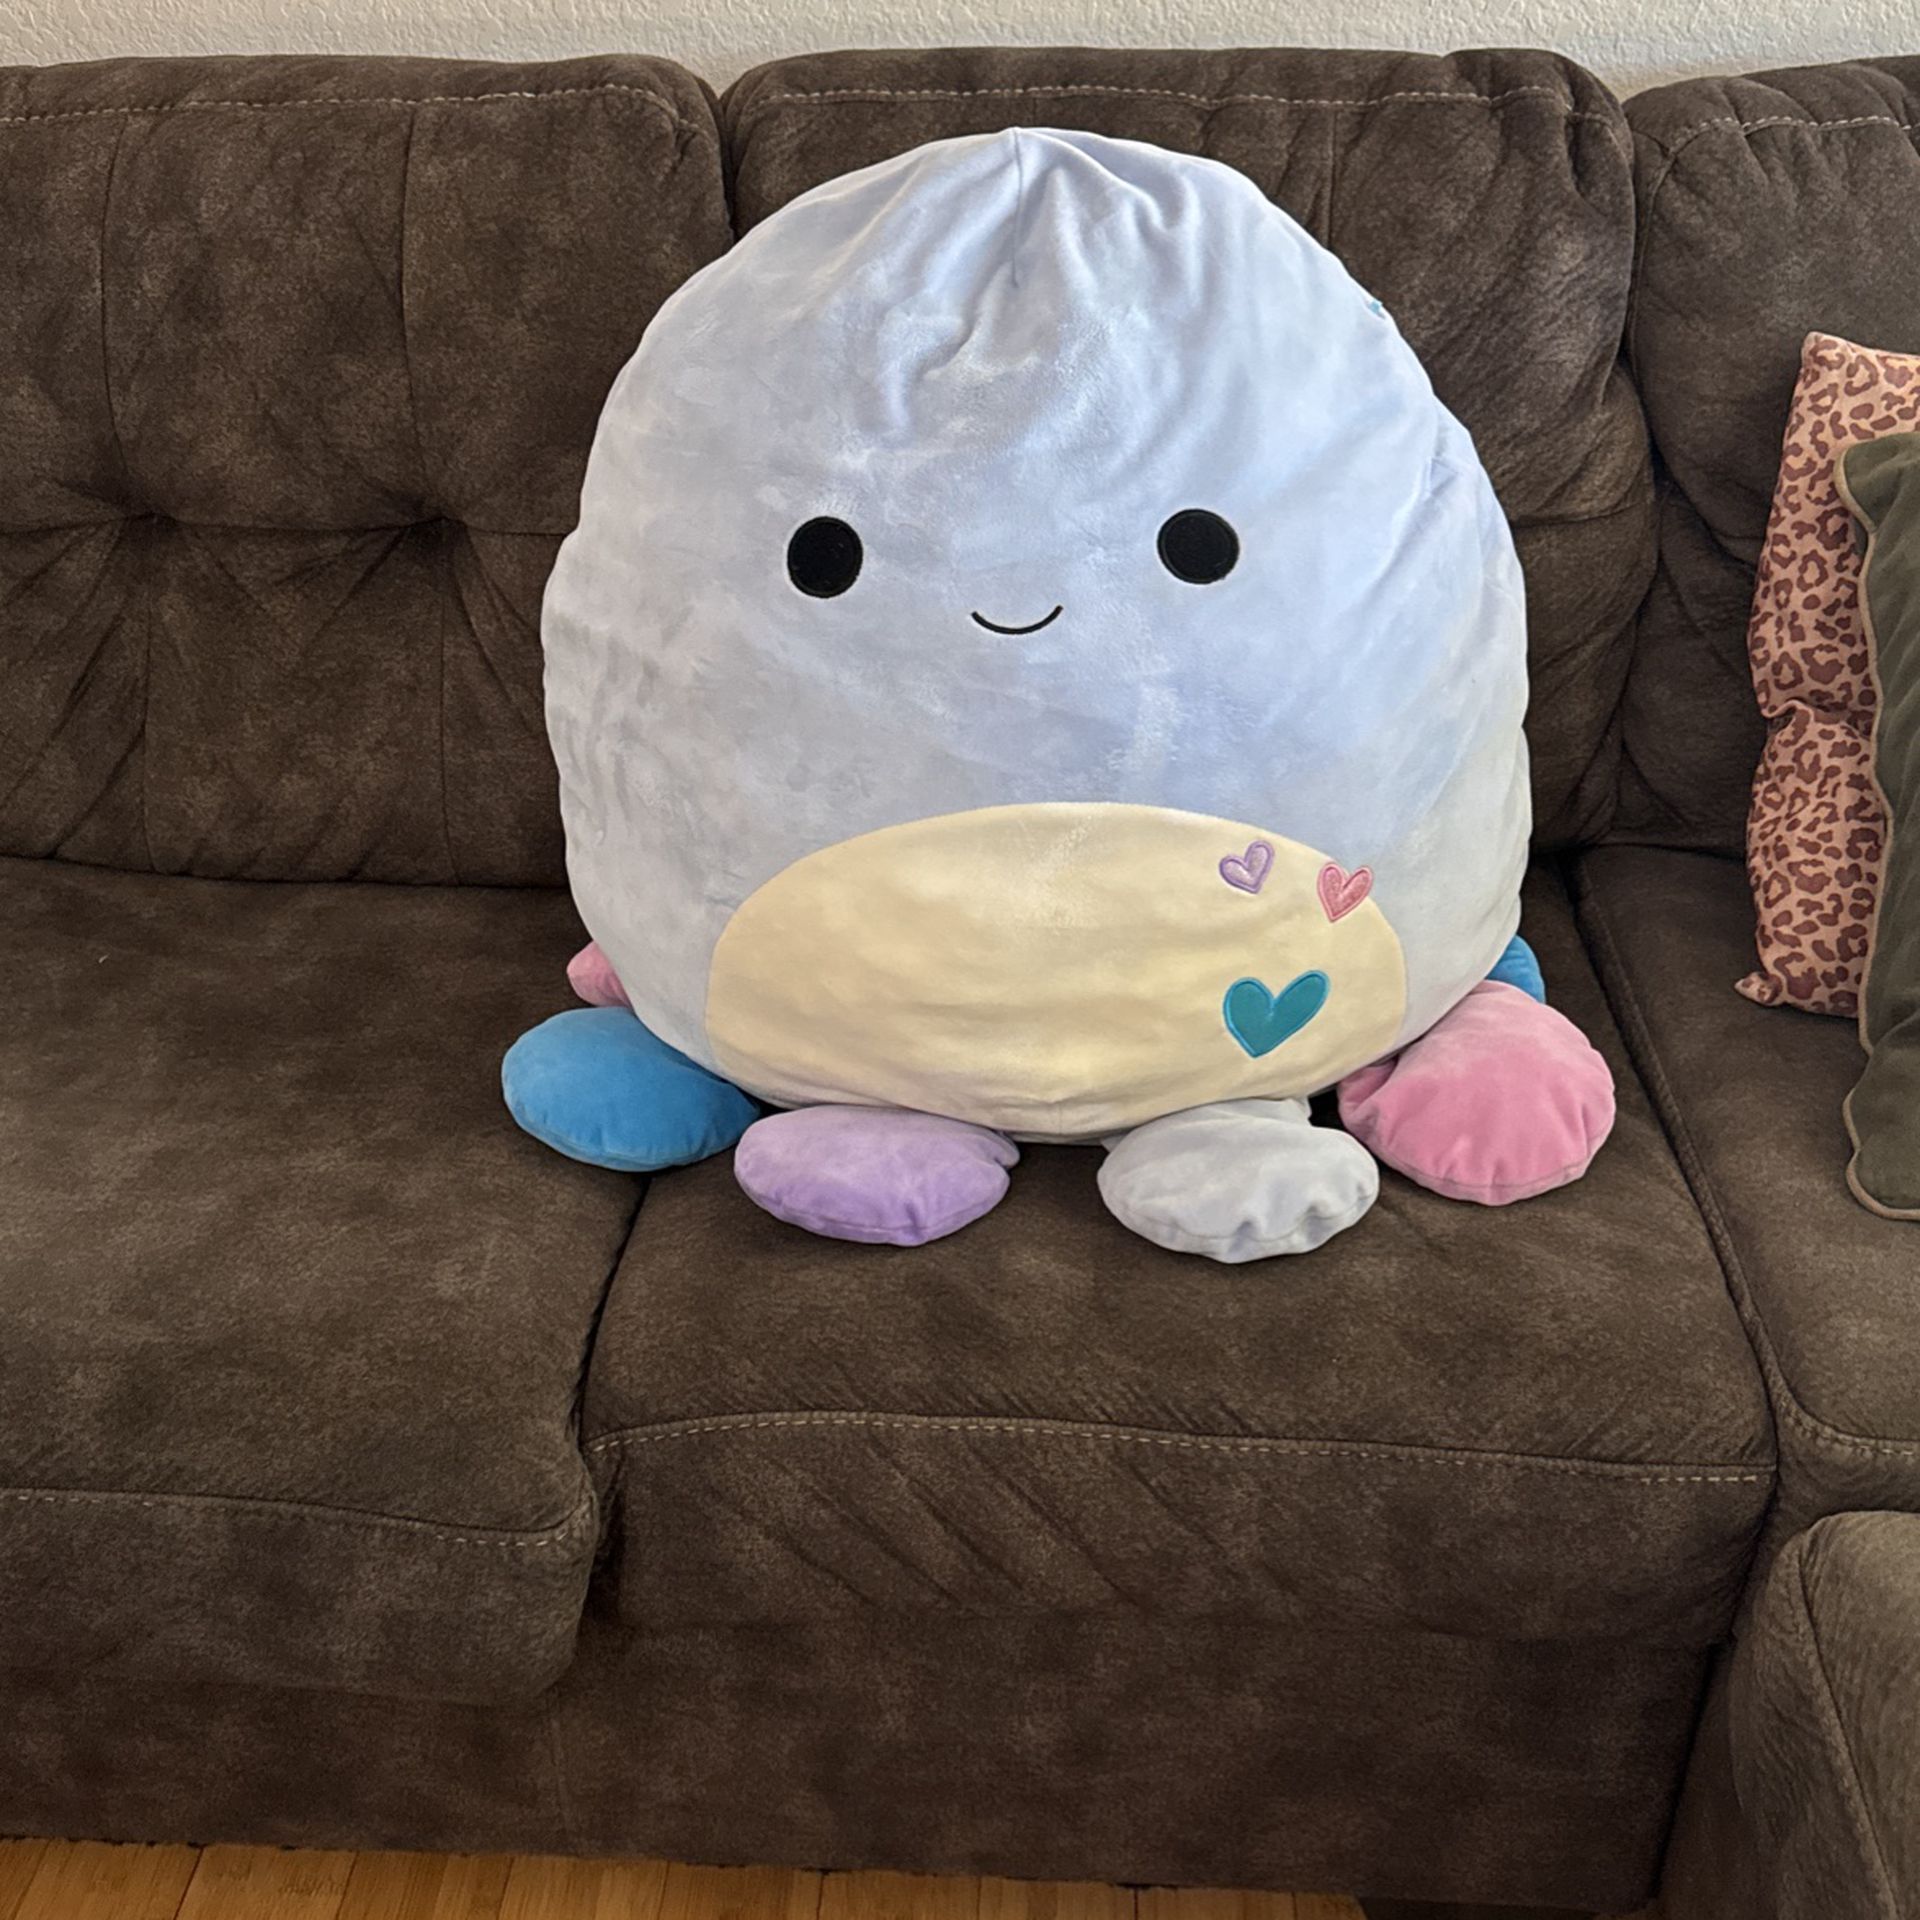 Huge Squishmallow Pillow